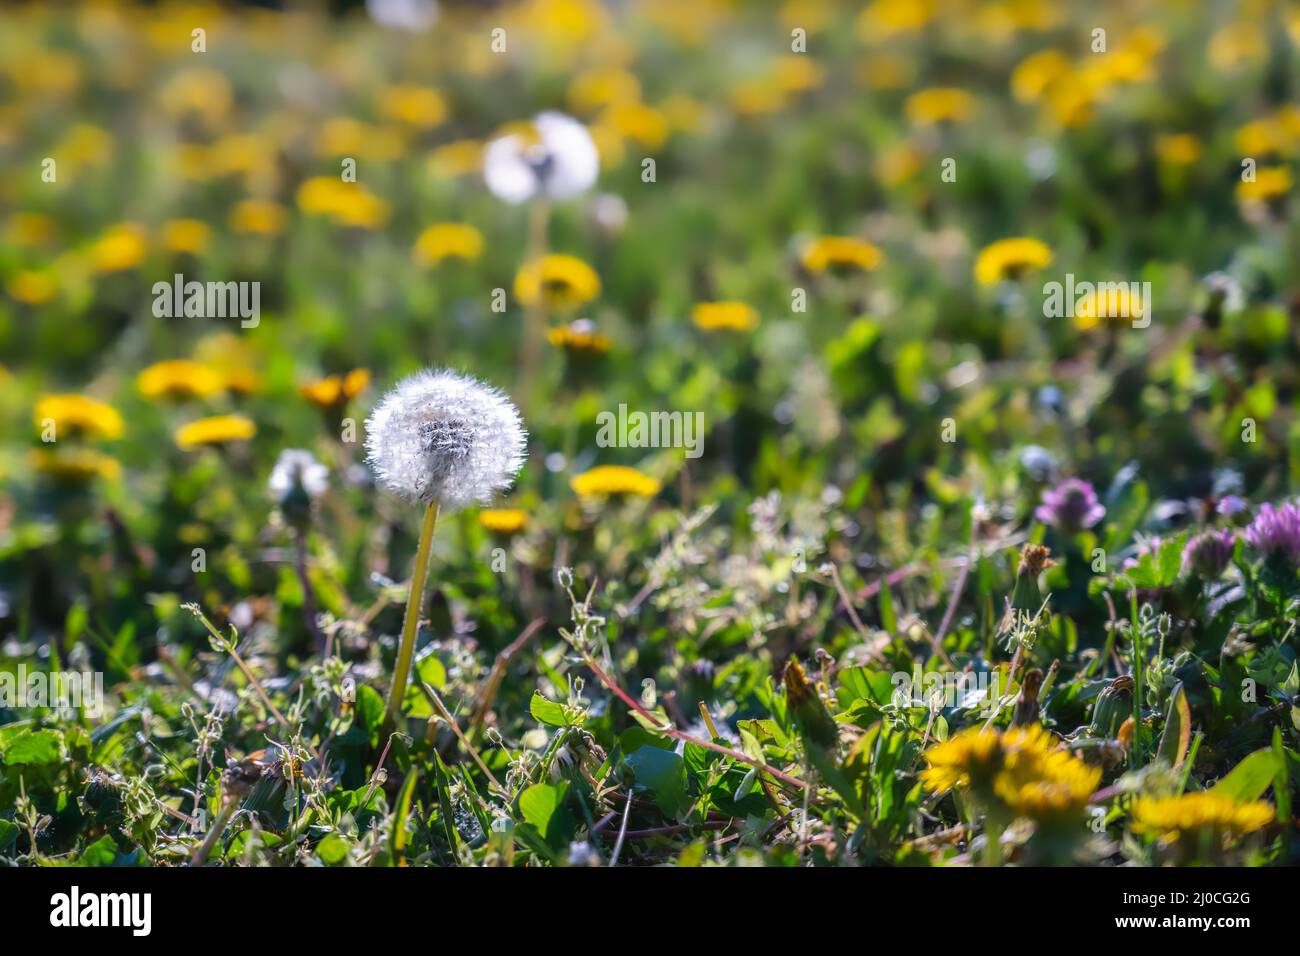 Field with yellow dandelions and full bloom dandelions in spring season Stock Photo